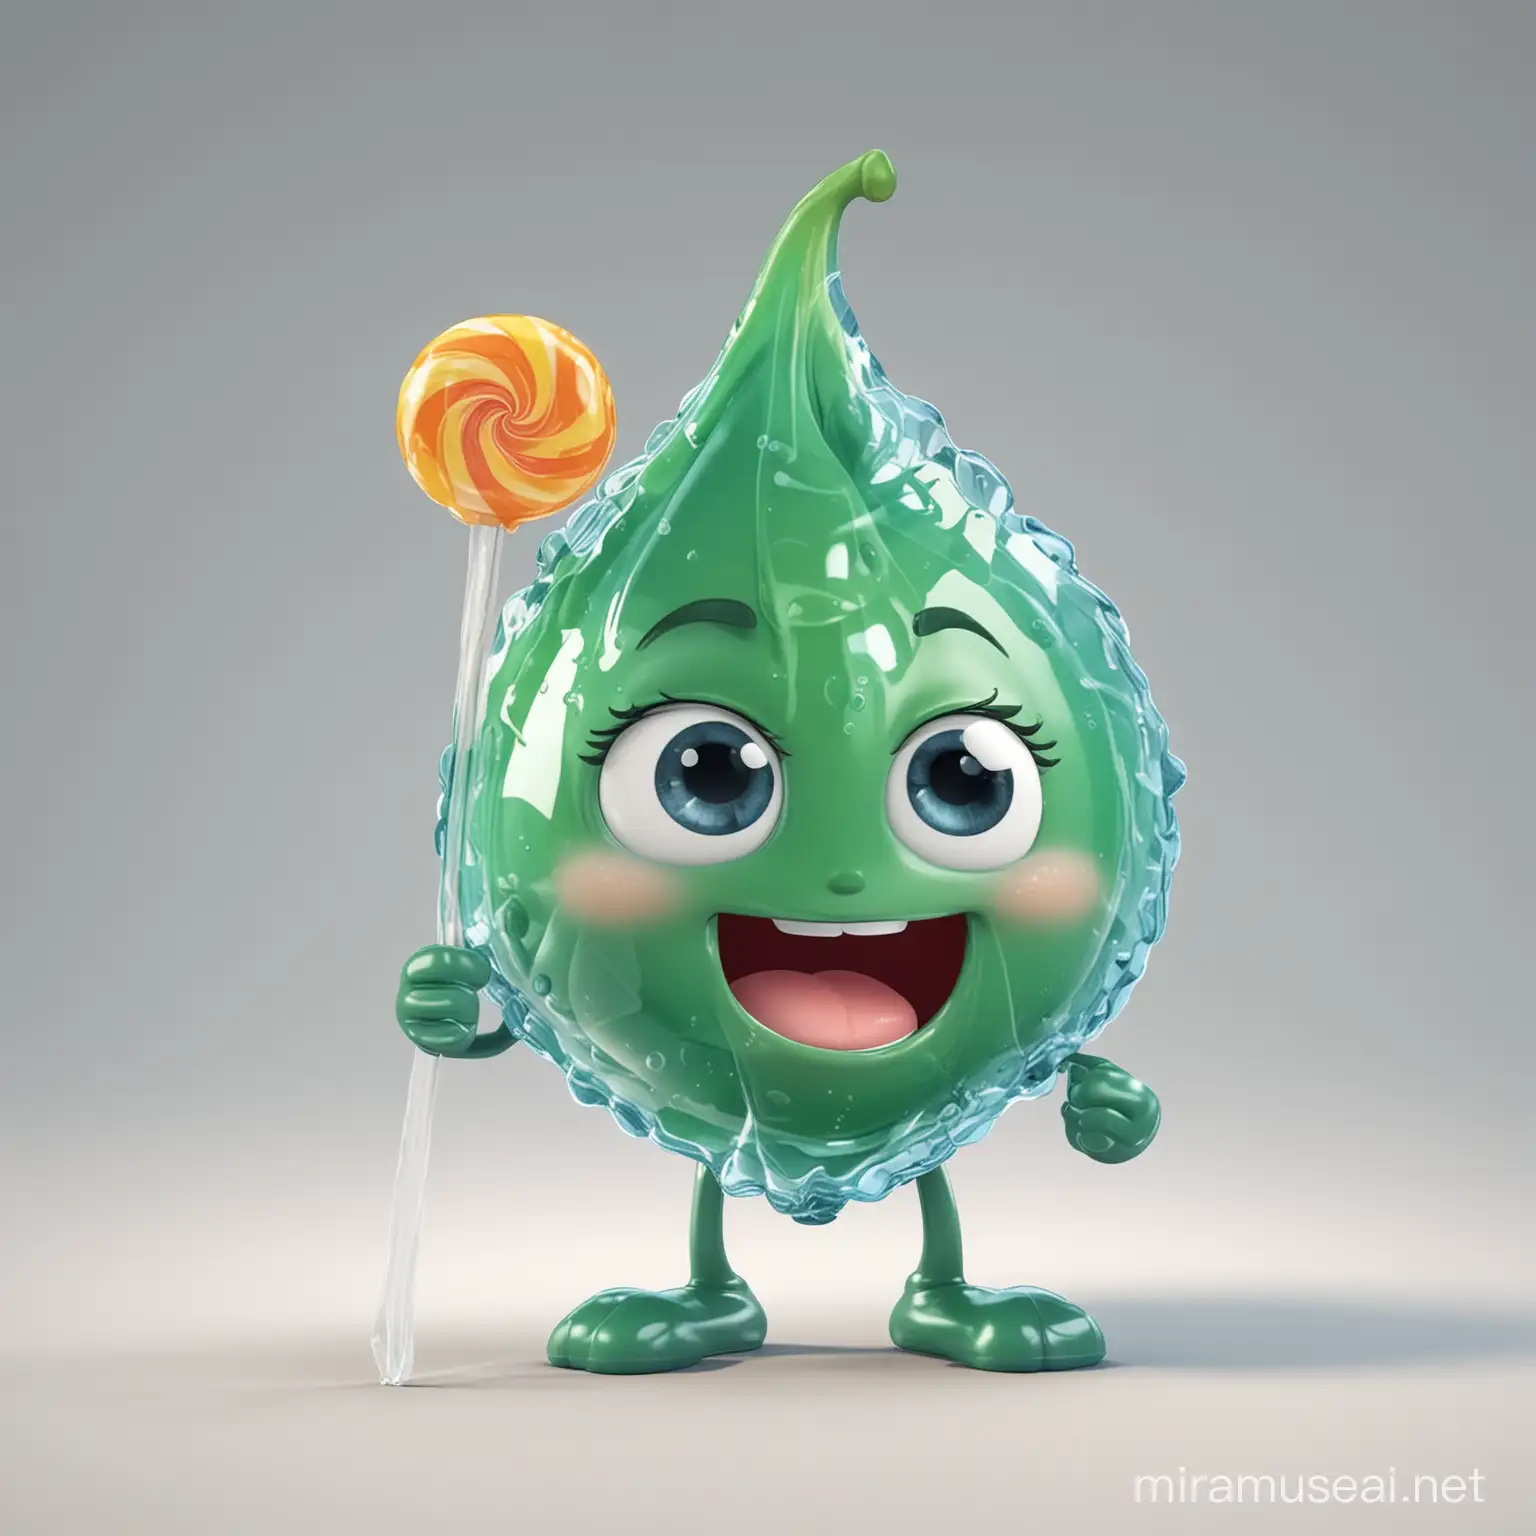 A water leaf cartoon character eating a transparent candy